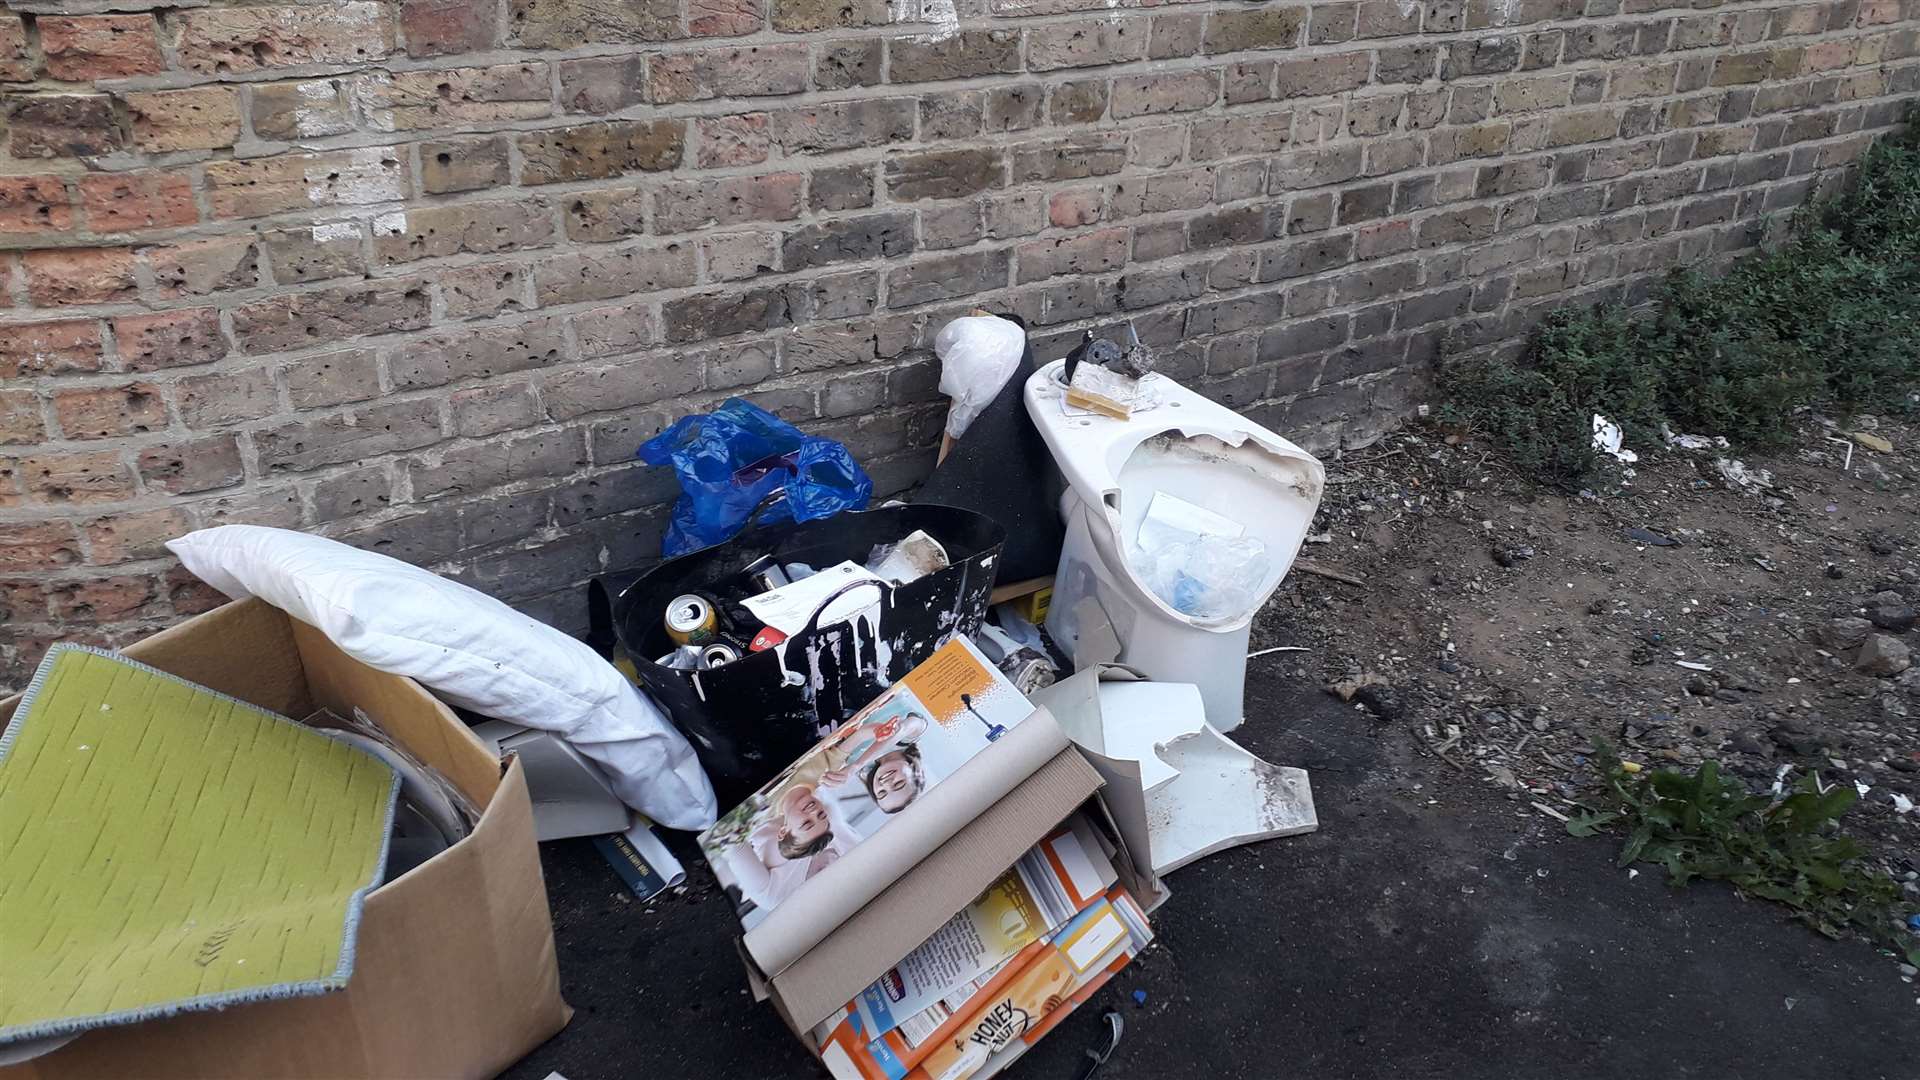 Belongings and a broken toilet left dumped in an alley. Picture: Thanet District Council